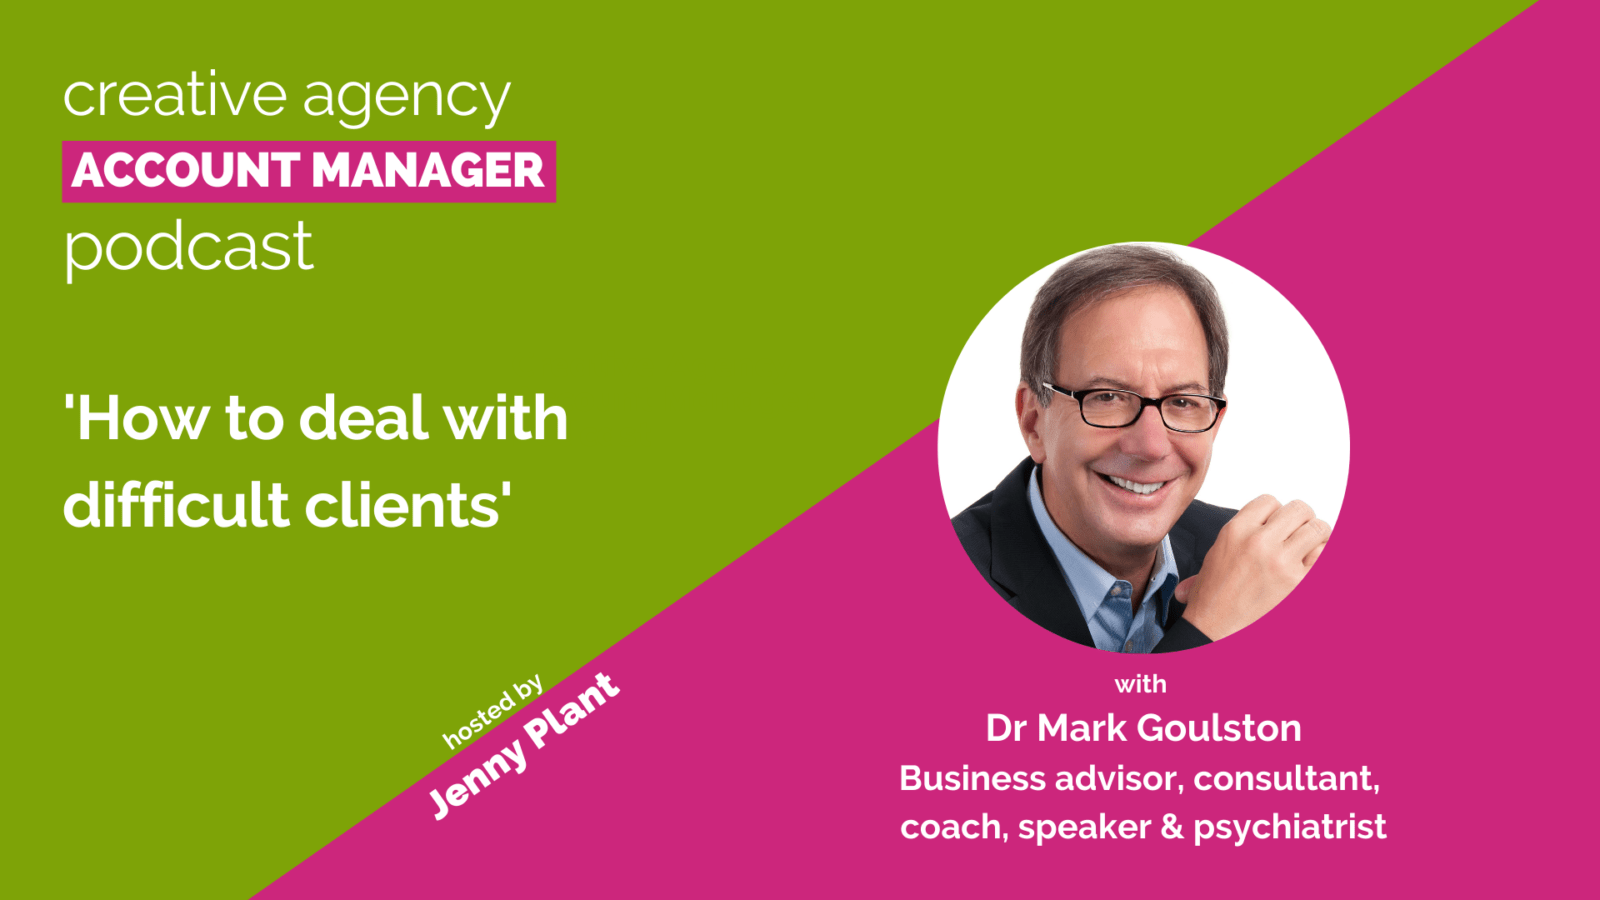 How to deal with difficult clients, with Dr Mark Goulston